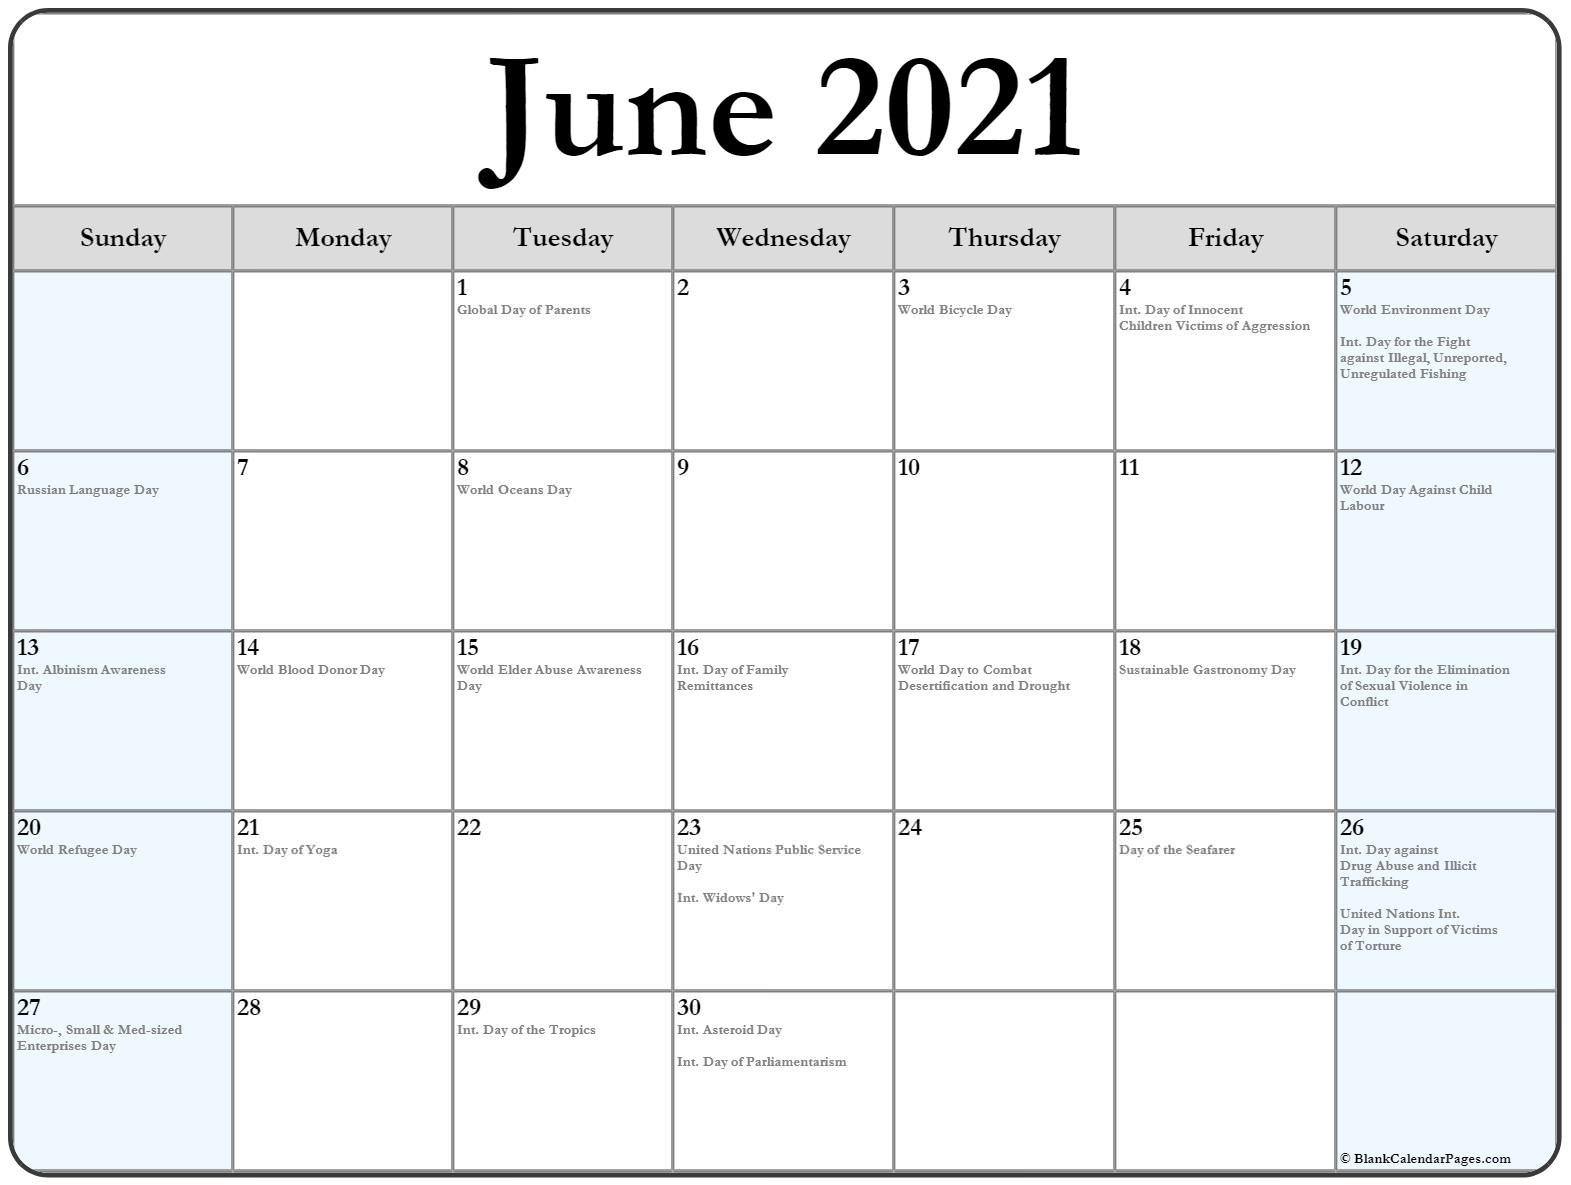 Collection Of June 2021 Calendars With Holidays December Global Holidays 2021 Calendar